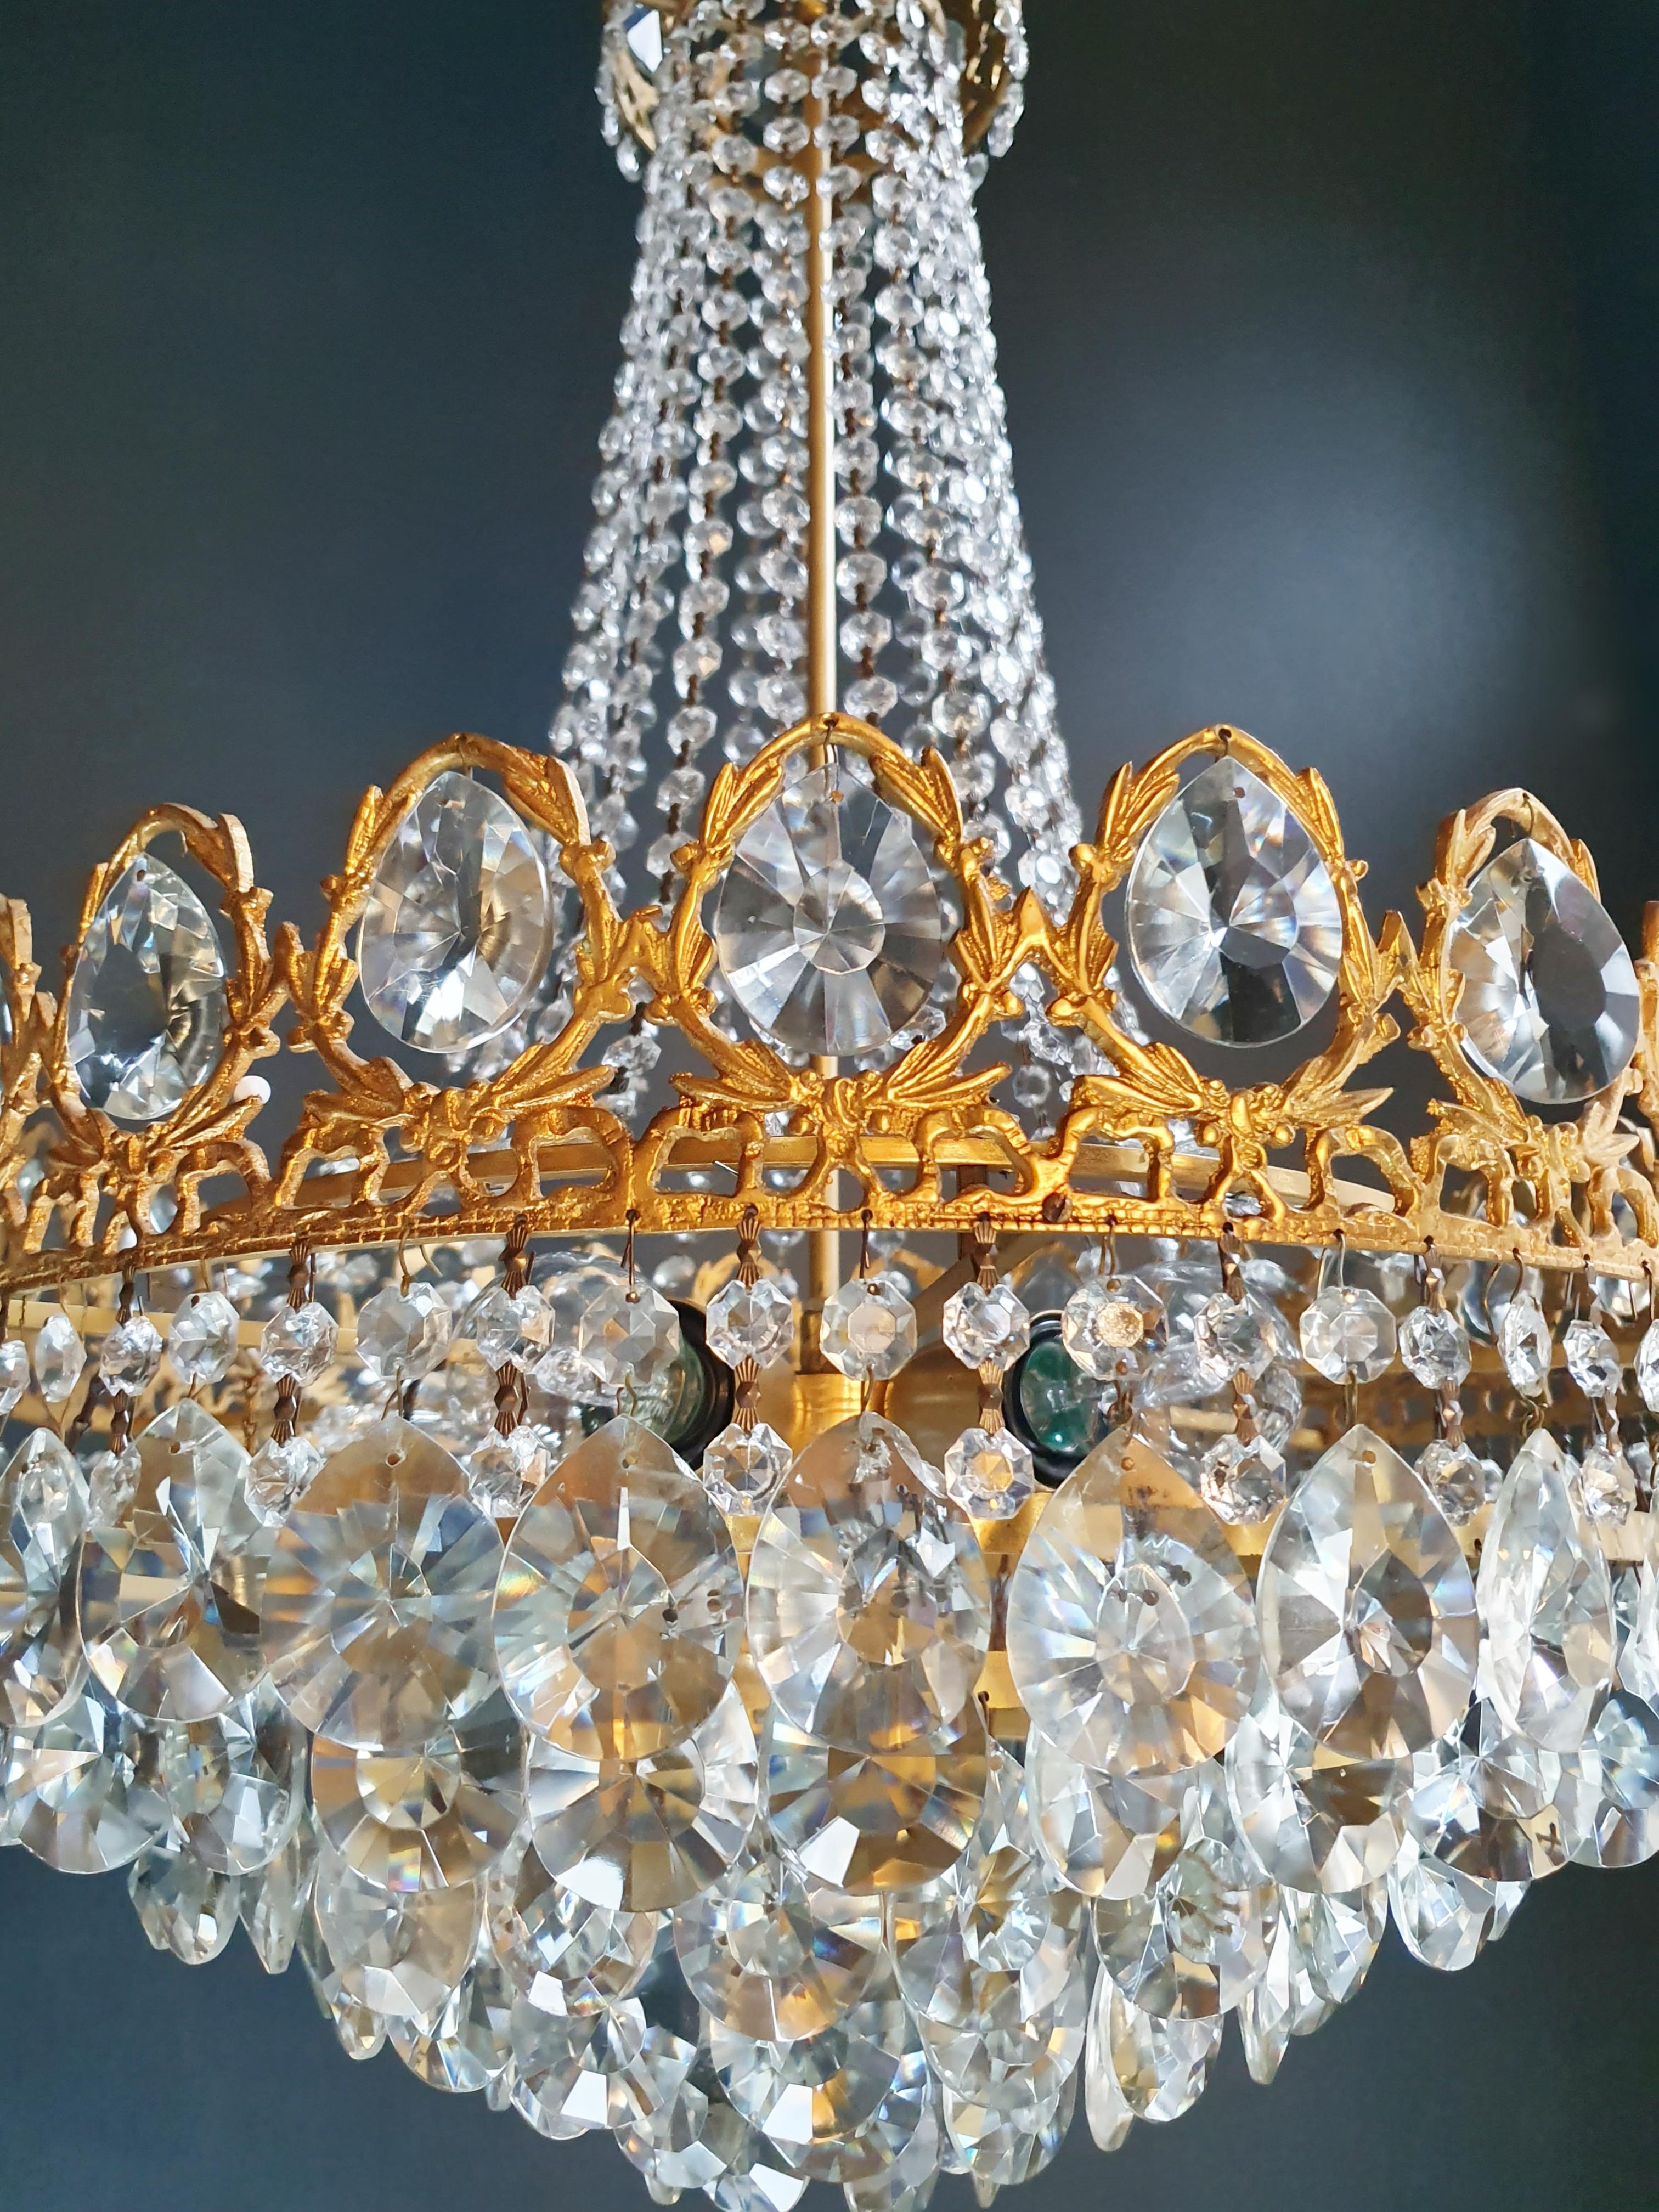 Empire chandelier crystal hall
Original preserved chandelier, circa 1950. Cabling and sockets completely renewed.
Measures: Total height 130 cm, height without chain 84 cm, diameter 50 cm, weight (approximately) 10kg.

Number of lights: